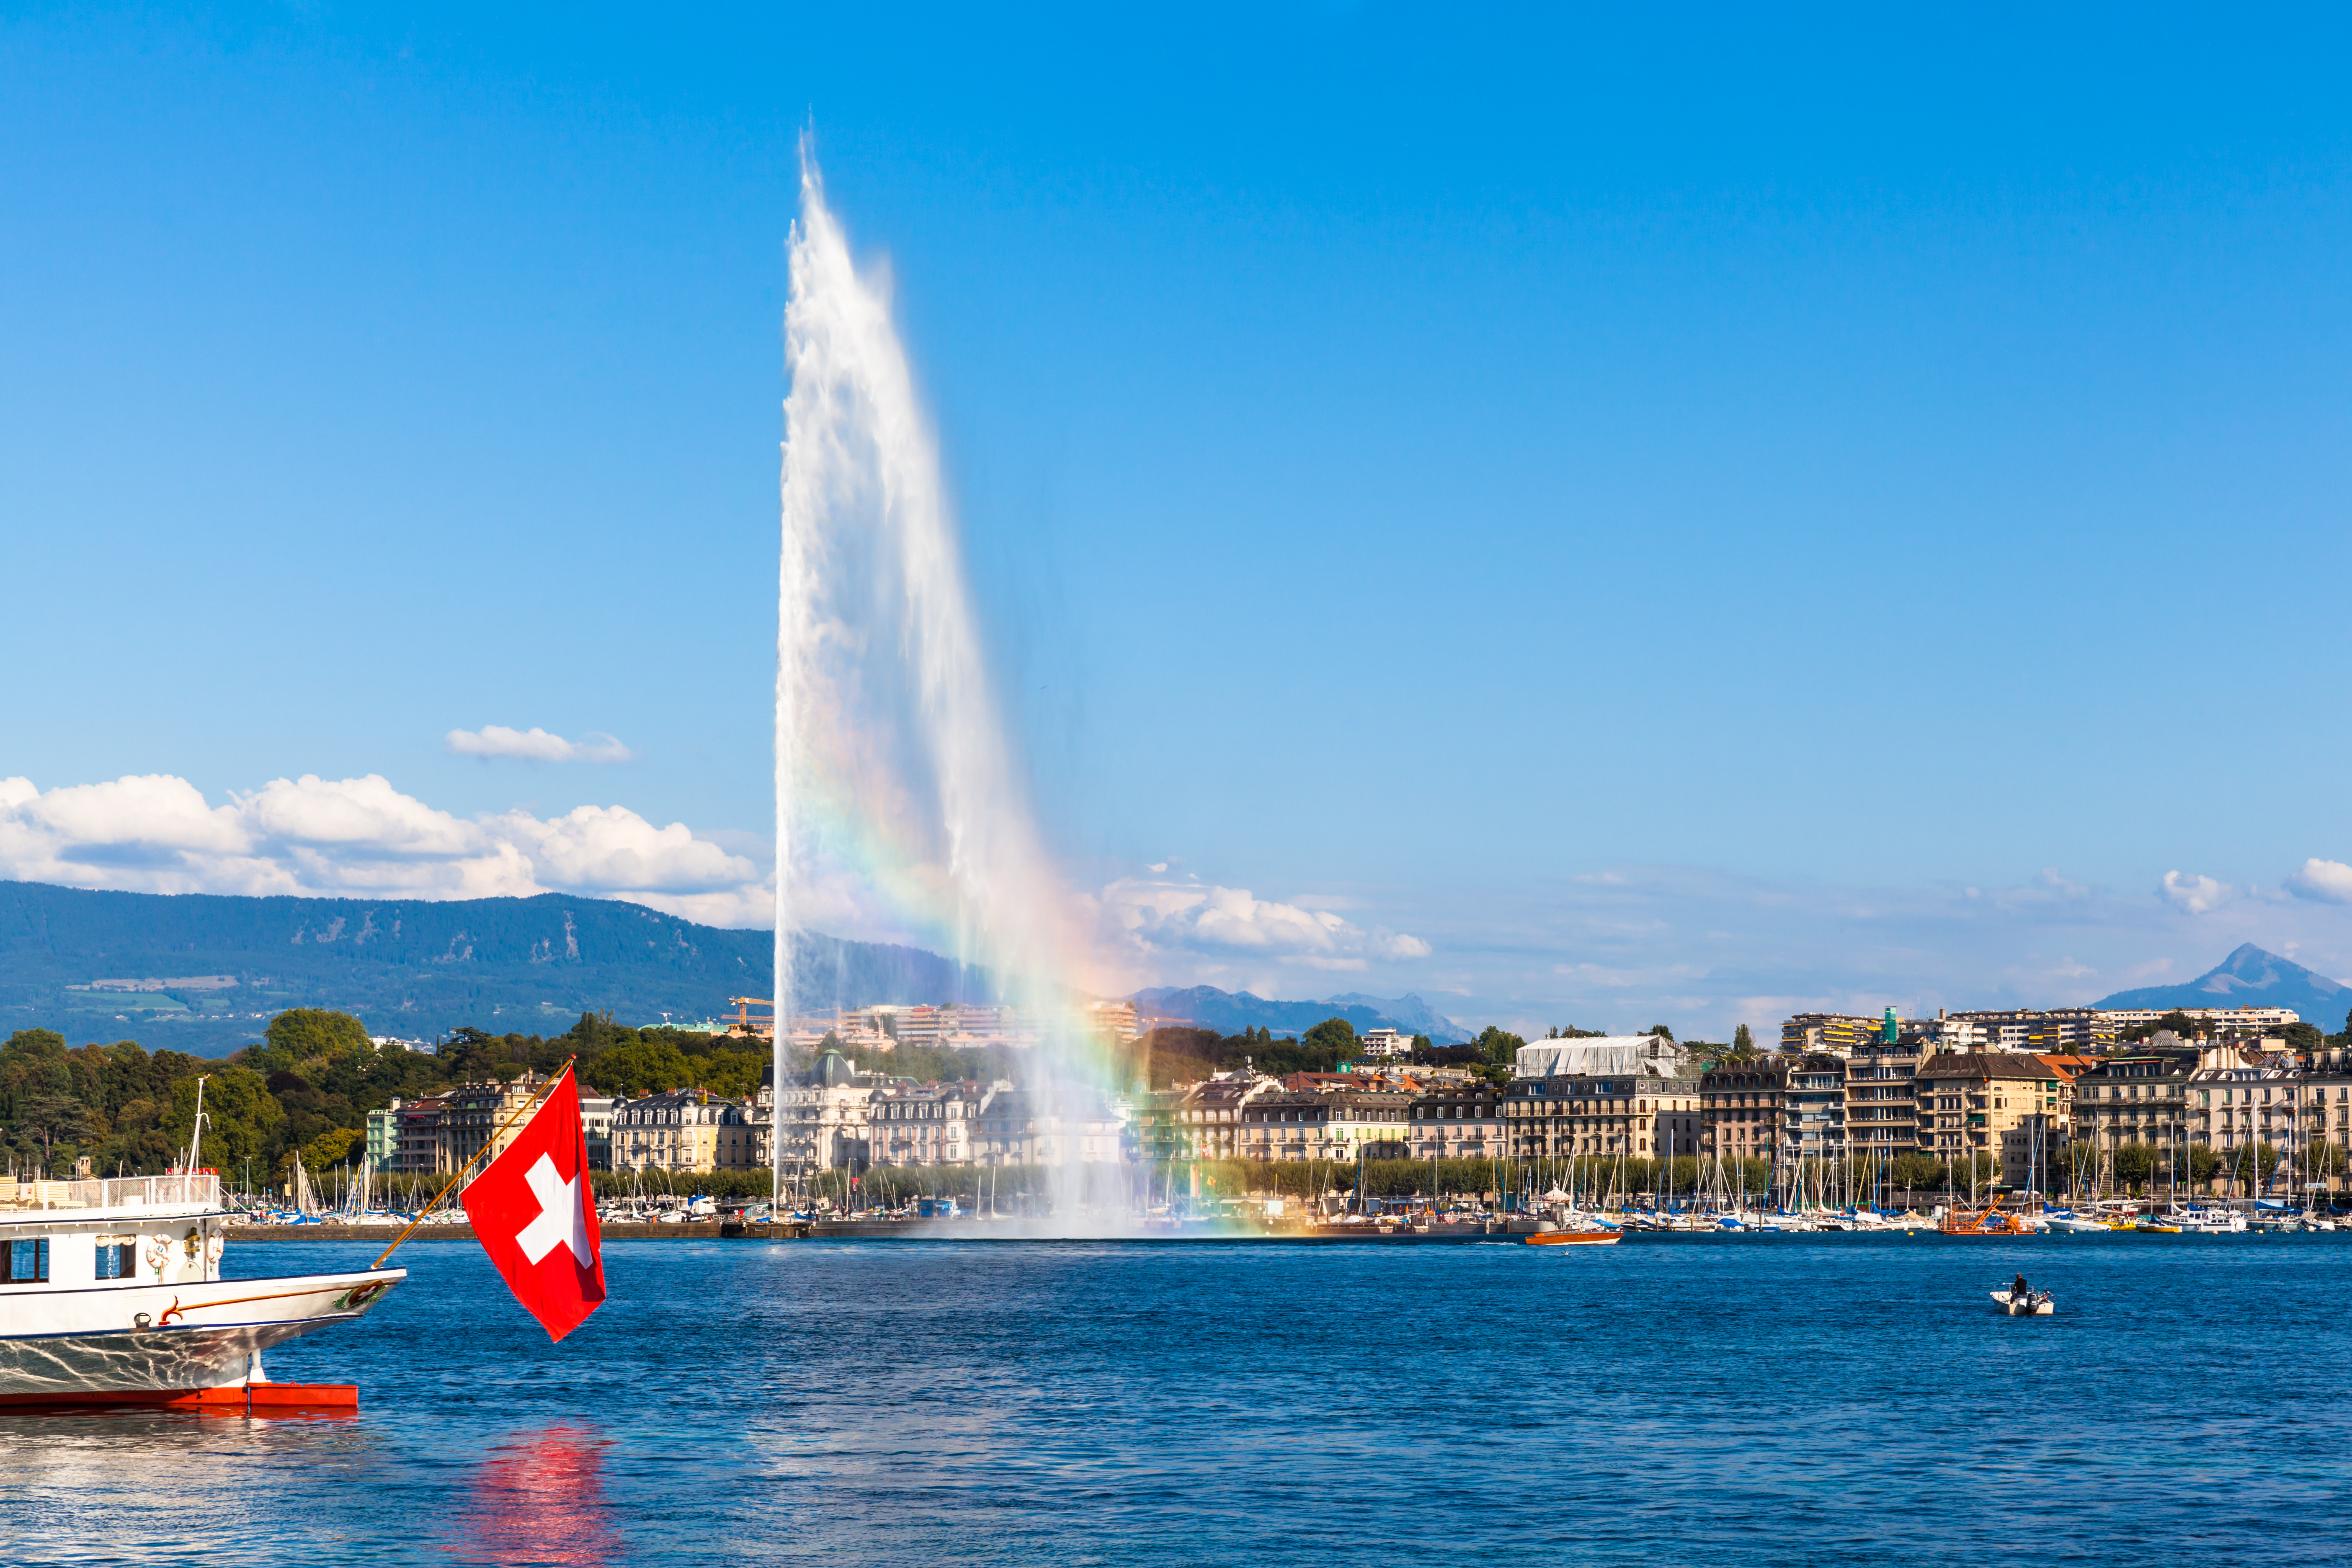 Situated at the south-western end of Lake Geneva, Geneva is the second city in Switzerland, and hosts the largest number of international organisations in the world. Visitors coming to Geneva for a run will admire, among other things, its water fountain, symbol of the city.